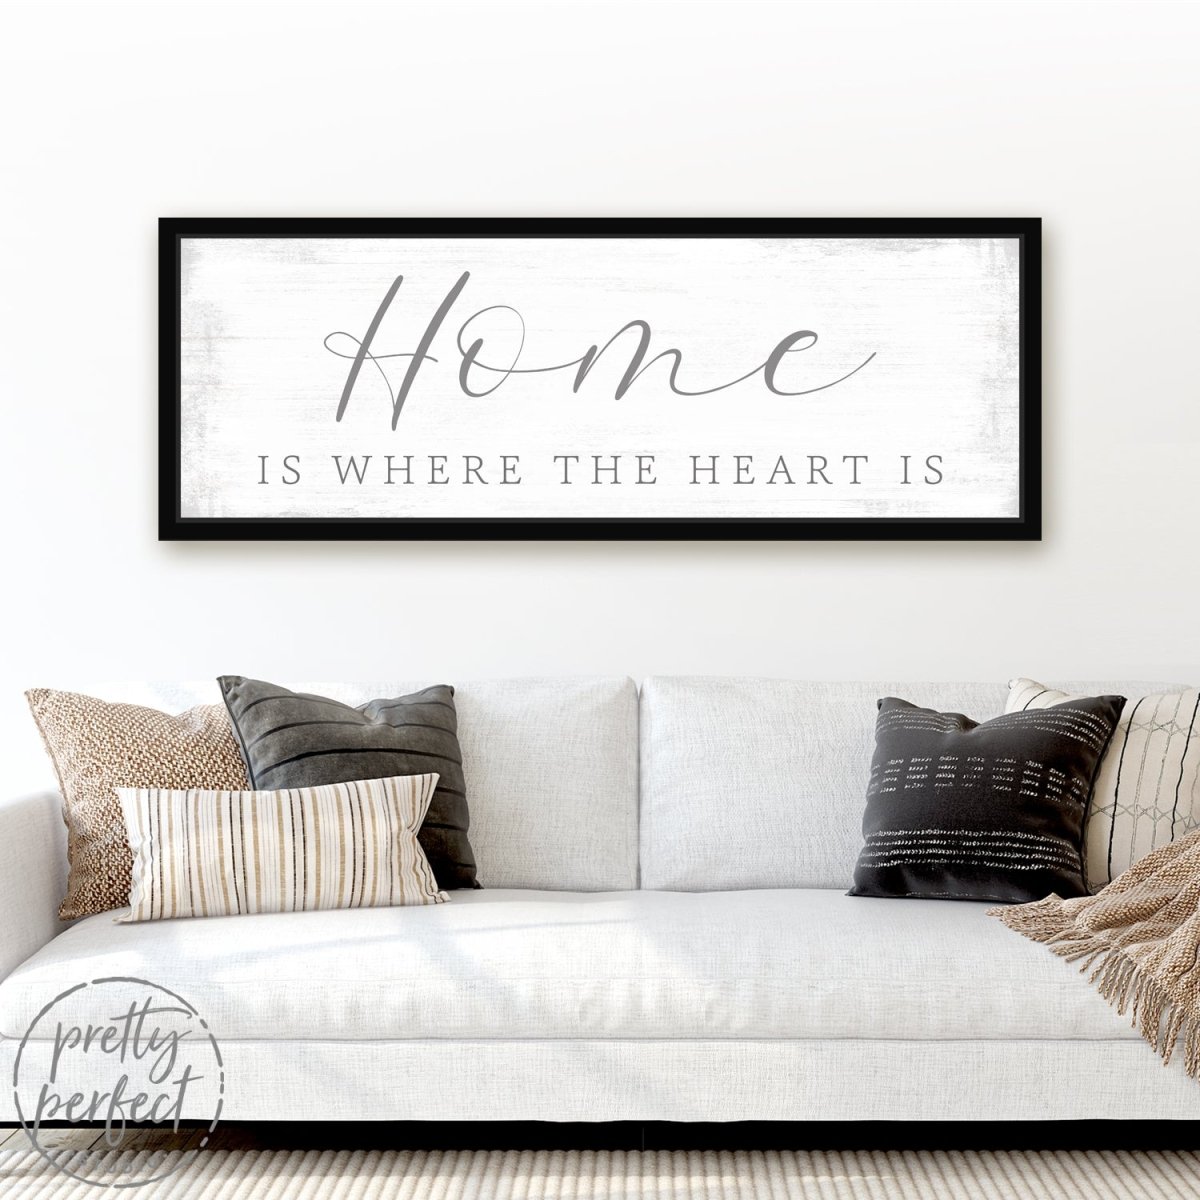 Home Is Where The Heart Is Sign Above Couch - Pretty Perfect Studio